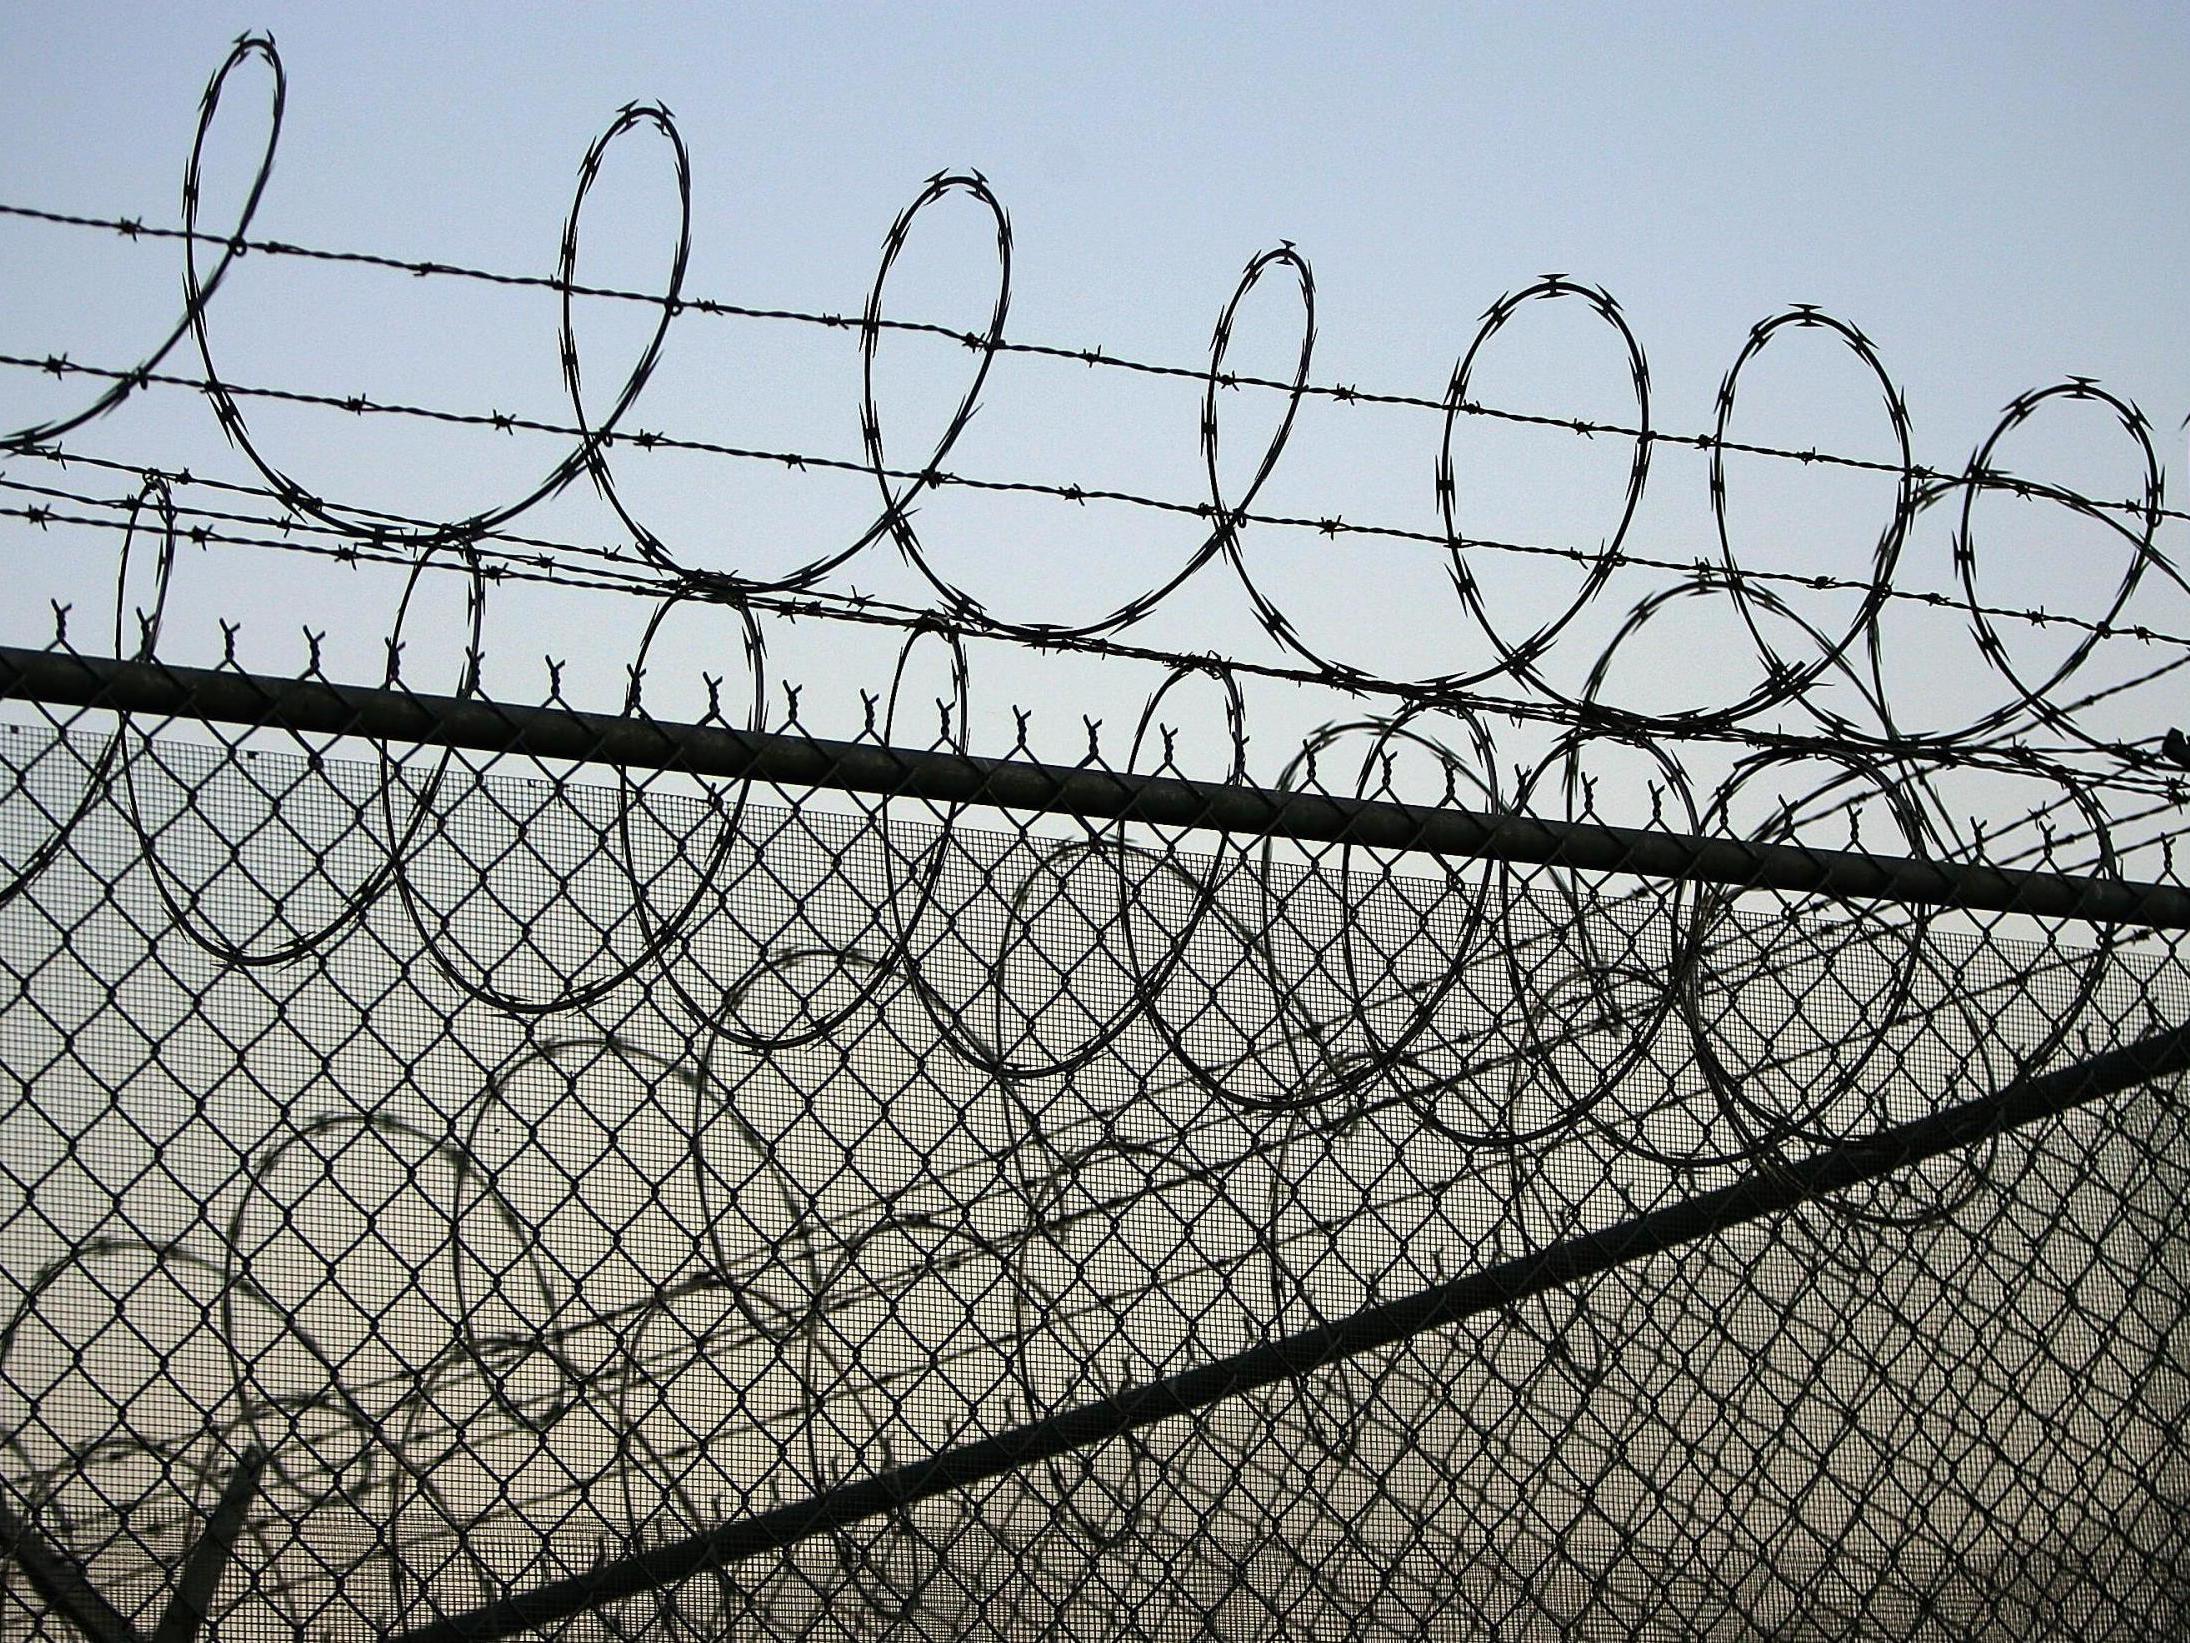 A report by the Labour Exploitation Advisory Group (LEAG) highlights cases where the government has identified immigration detainees as trafficking victims but have maintained their detention despite vulnerabilities